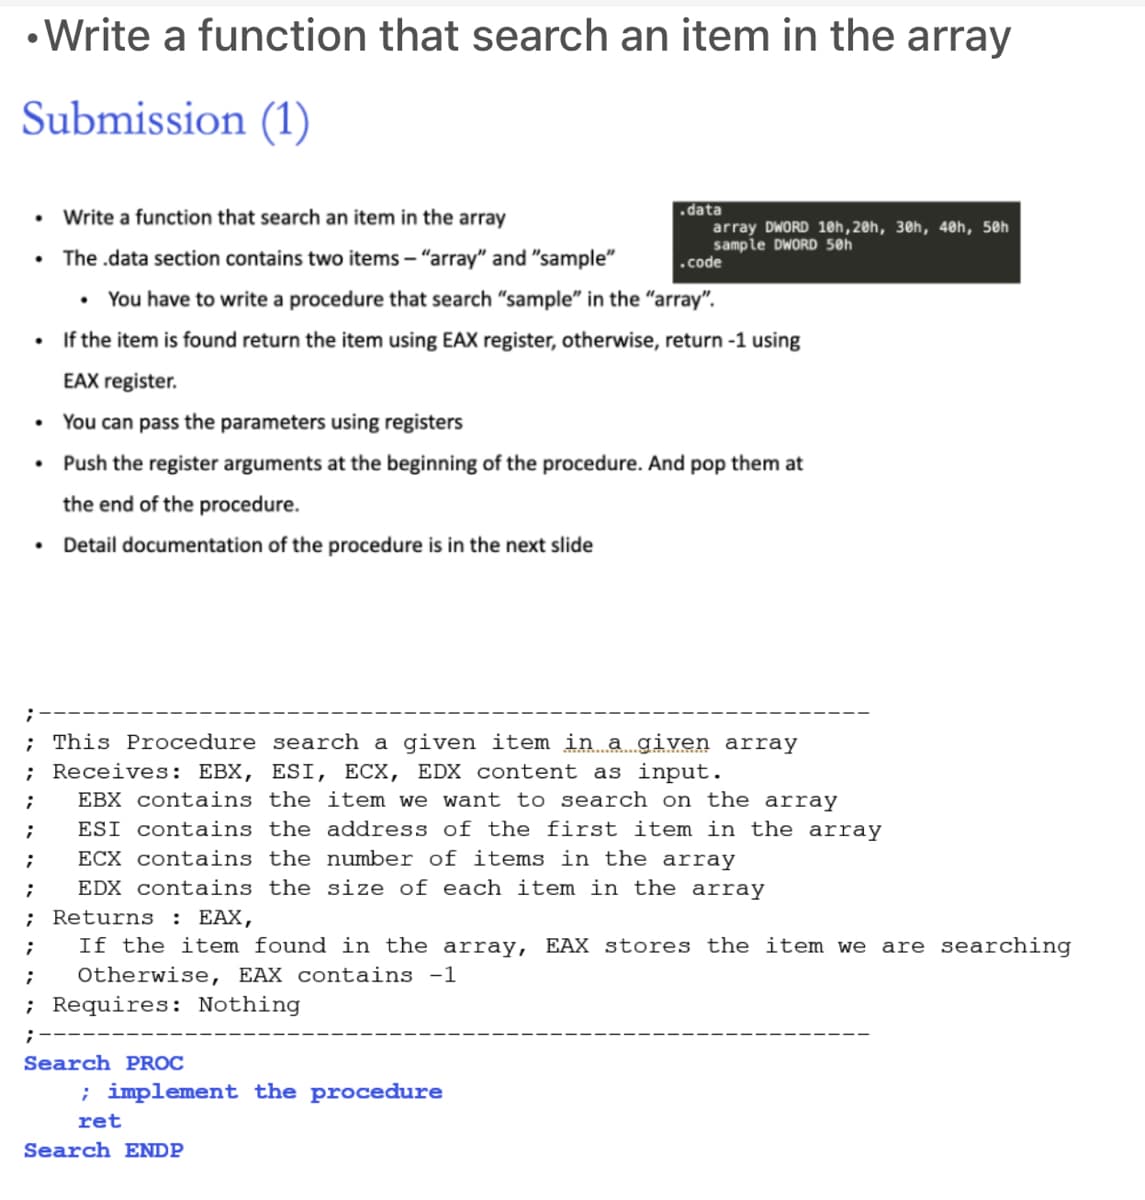 • Write a function that search an item in the array
Submission (1)
• Write a function that search an item in the array
• The .data section contains two items – "array" and "sample"
data
array DWORD 1@h,20h, 30h, 40h, 50h
sample DWORD 50h
.code
You have to write a procedure that search "sample" in the "array".
If the item is found return the item using EAX register, otherwise, return -1 using
EAX register.
• You can pass the parameters using registers
Push the register arguments at the beginning of the procedure. A
pop them at
the end of the procedure.
• Detail documentation of the procedure is in the next slide
; This Procedure search a given item in a given array
; Receives: EBX, ESI, ECX, EDX content as input.
EBX contains the item we want to search on the array
ESI contains the address of the first item in the array
ECX contains the number of items in the array
EDX contains the size of each item in the array
Returns
: EAX,
If the item found in the array, EAX stores the item we
are searching
Otherwise, EAX contains -1
; Requires: Nothing
;-
Search PROC
; implement the procedure
ret
Search ENDP
